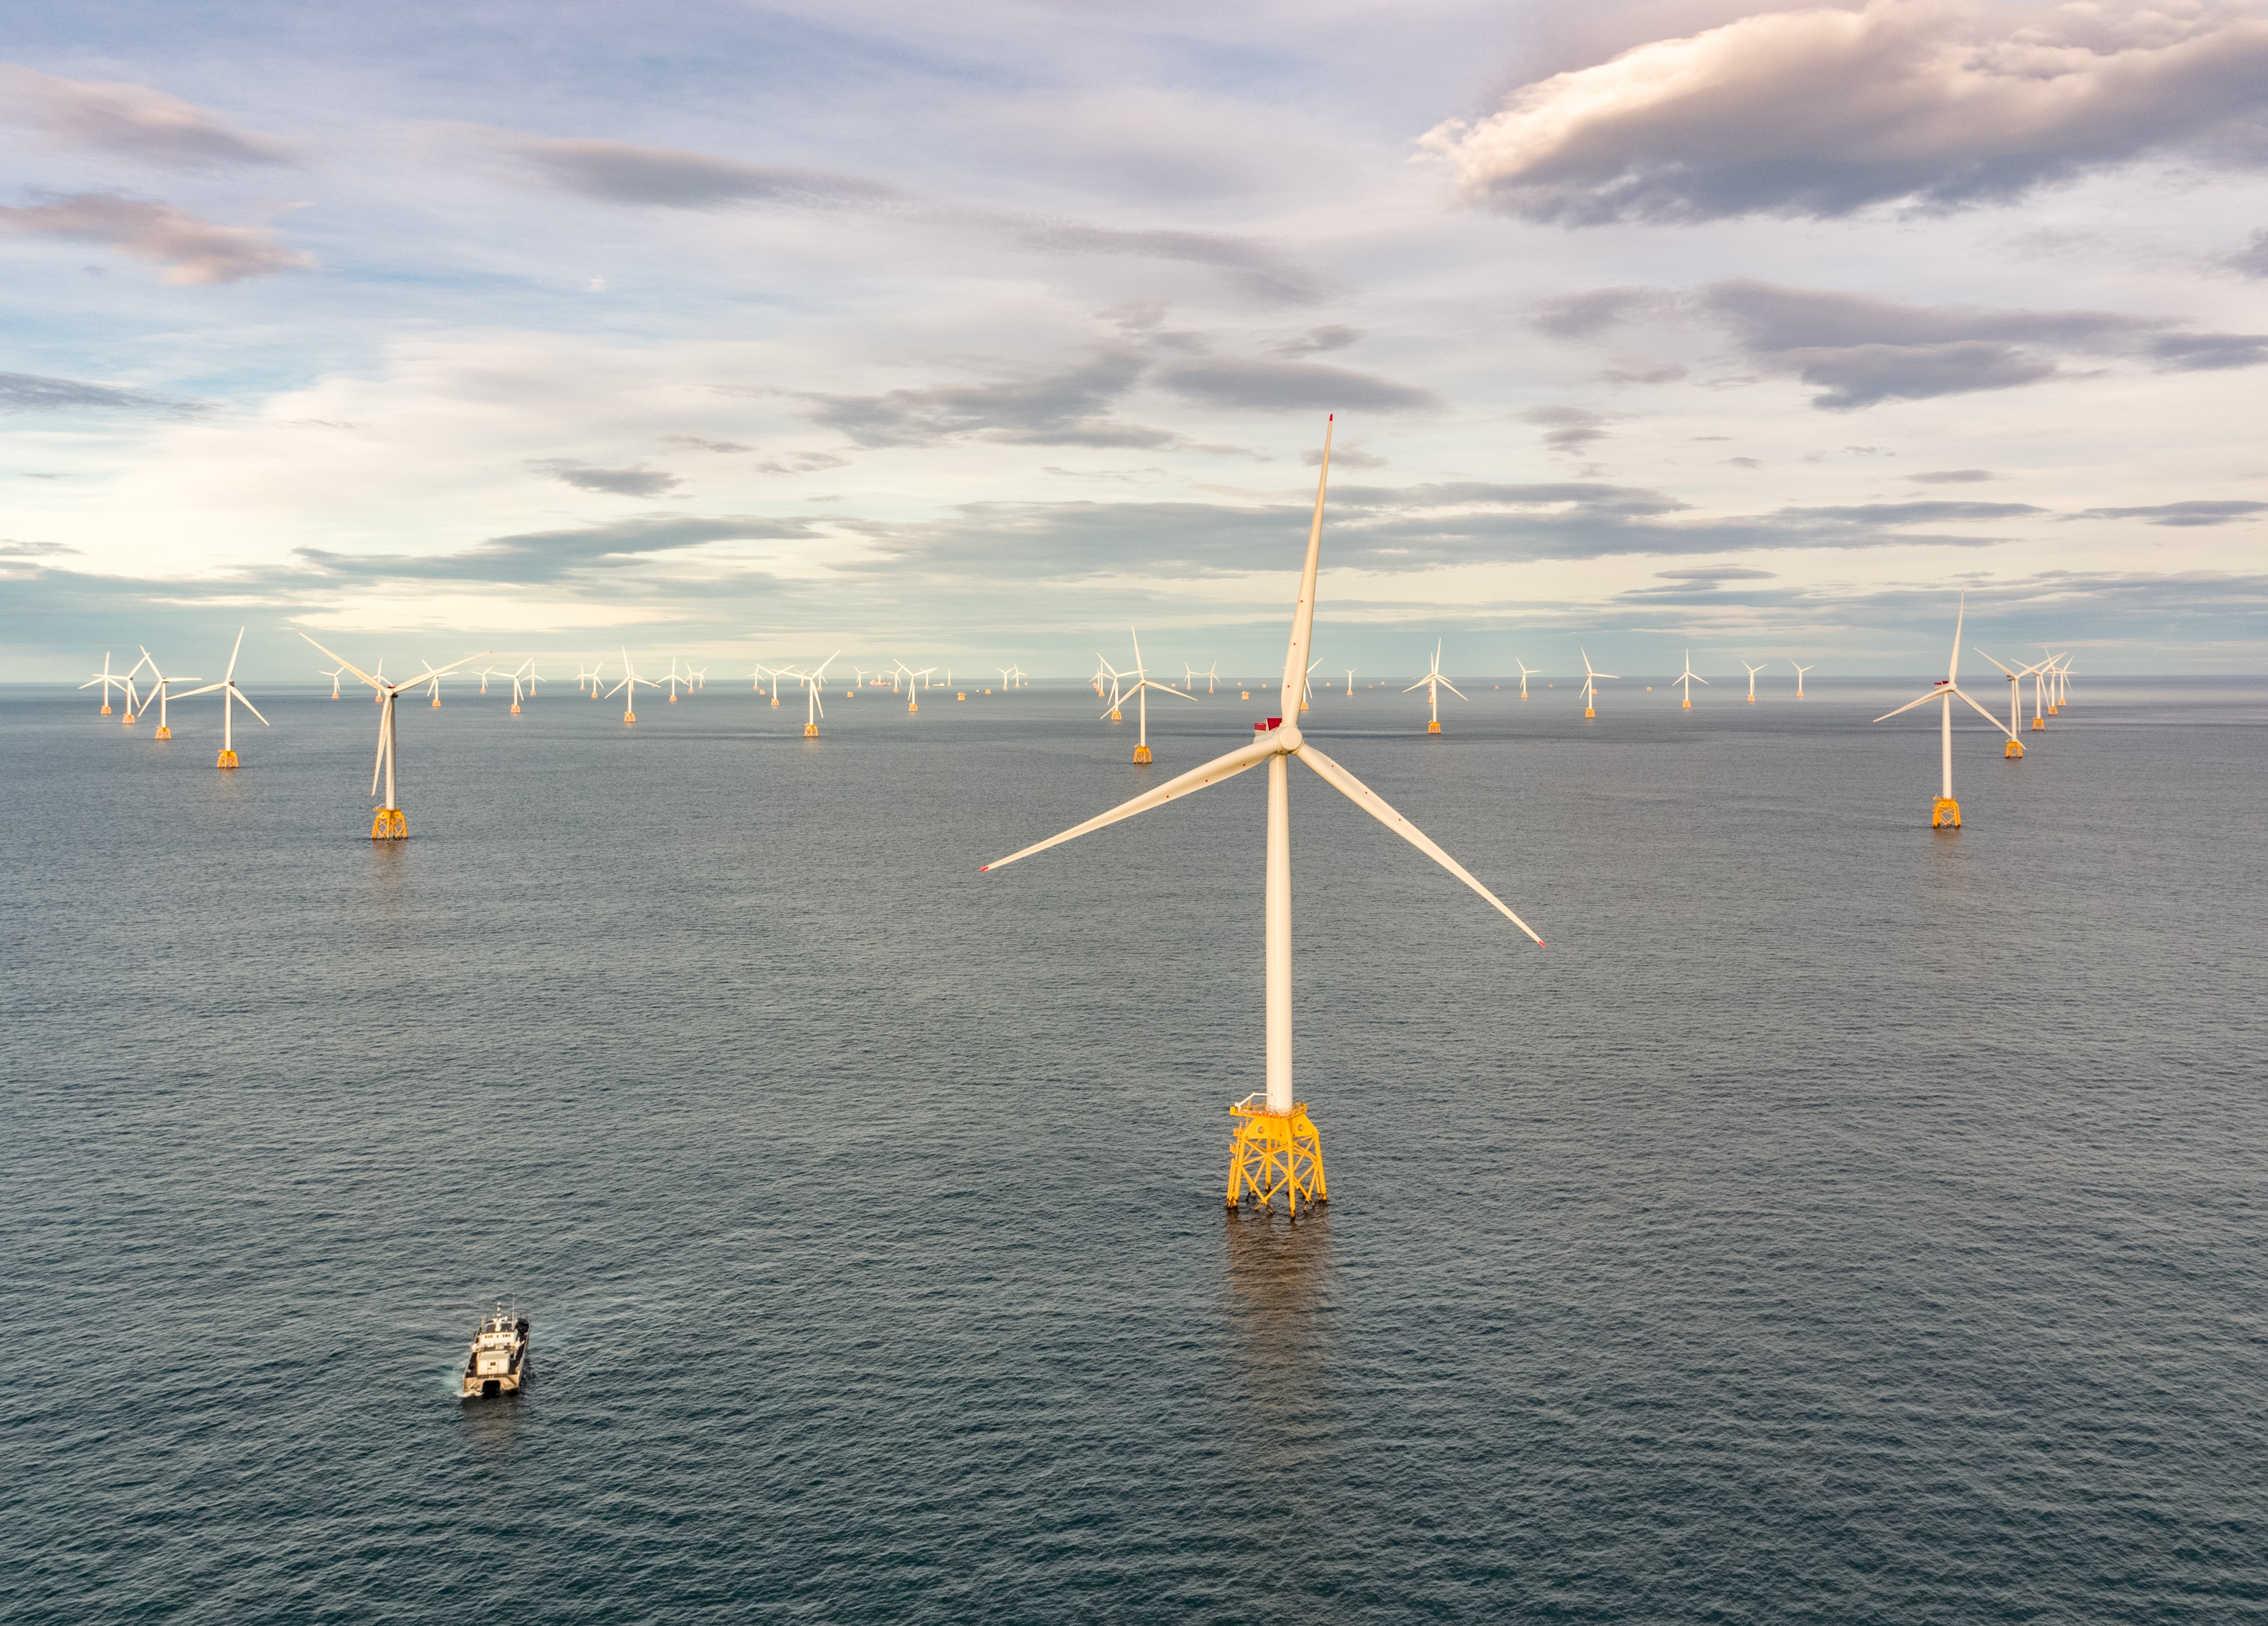 A photo of SSE's Beatrice offshore wind farm in Scotland